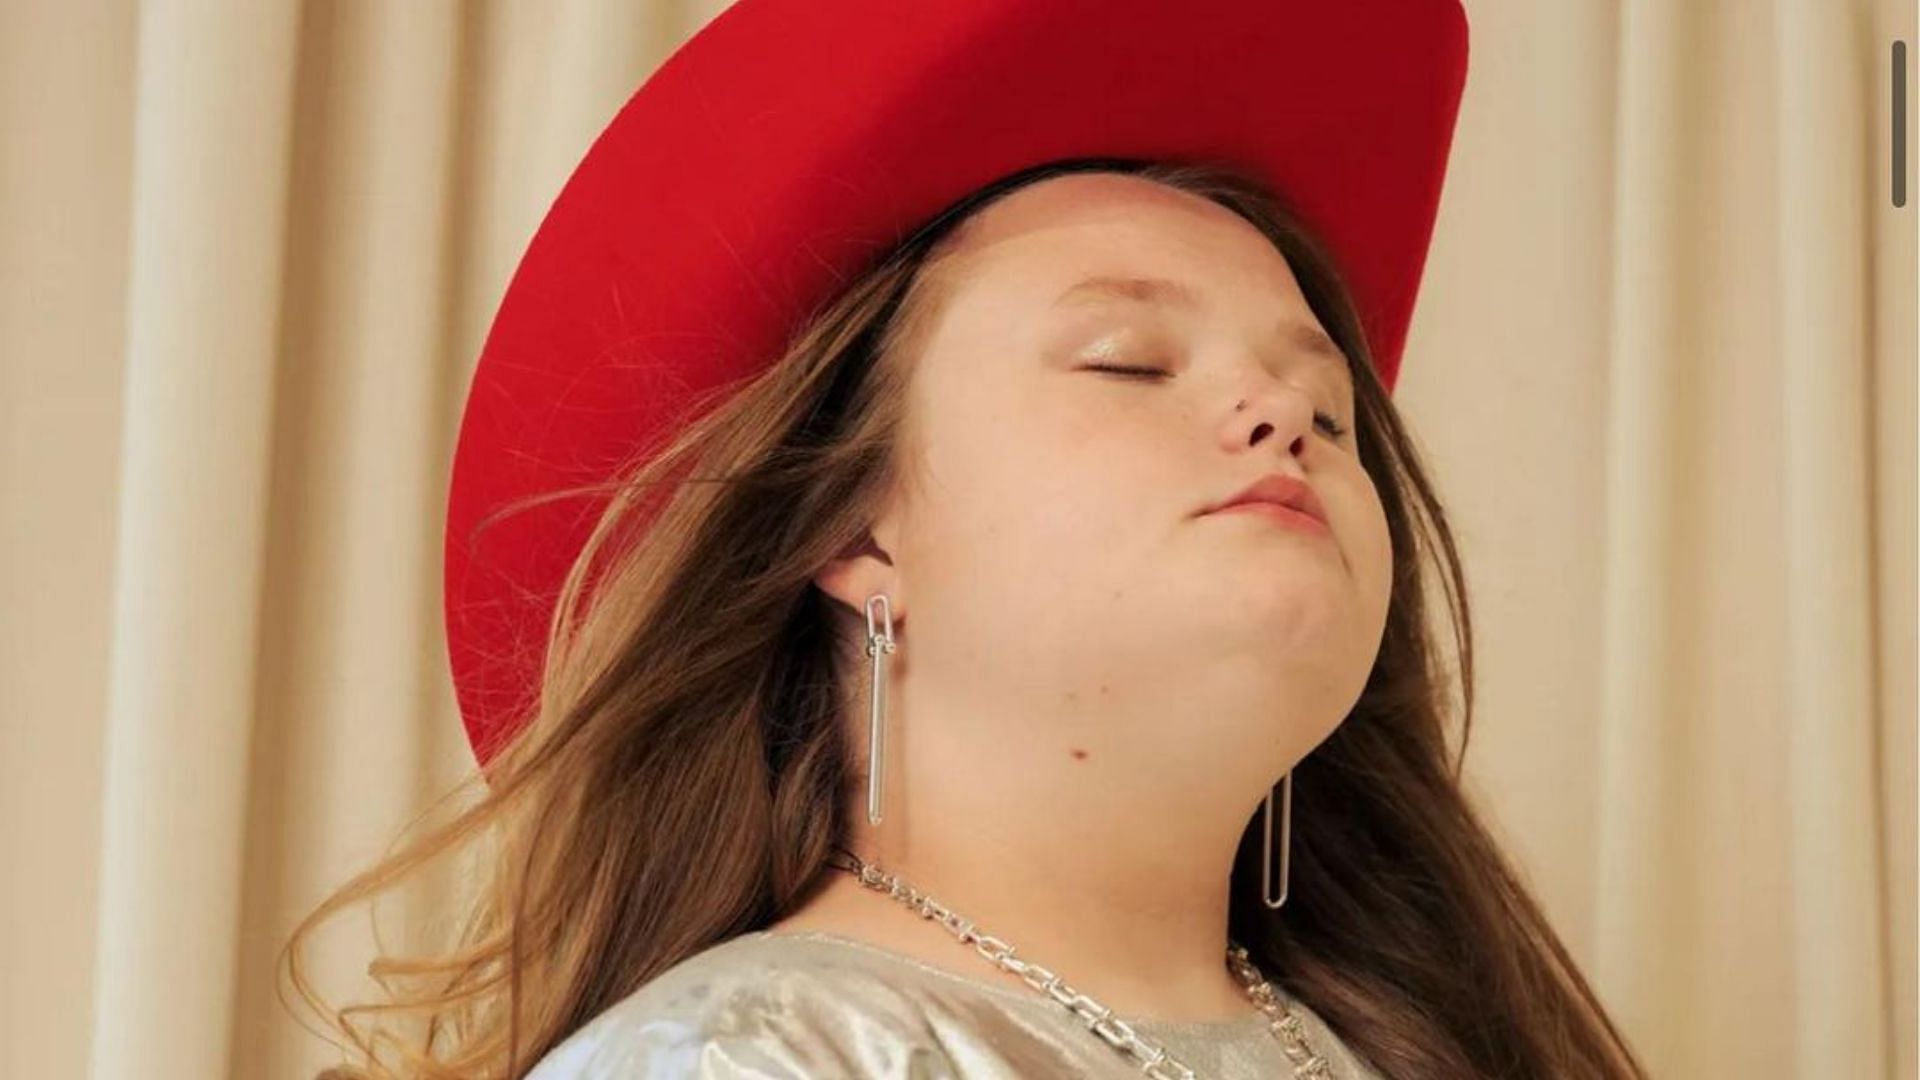 Alana from Mama June: Road to Redemption (Image via Instagram/@ honeybooboo)